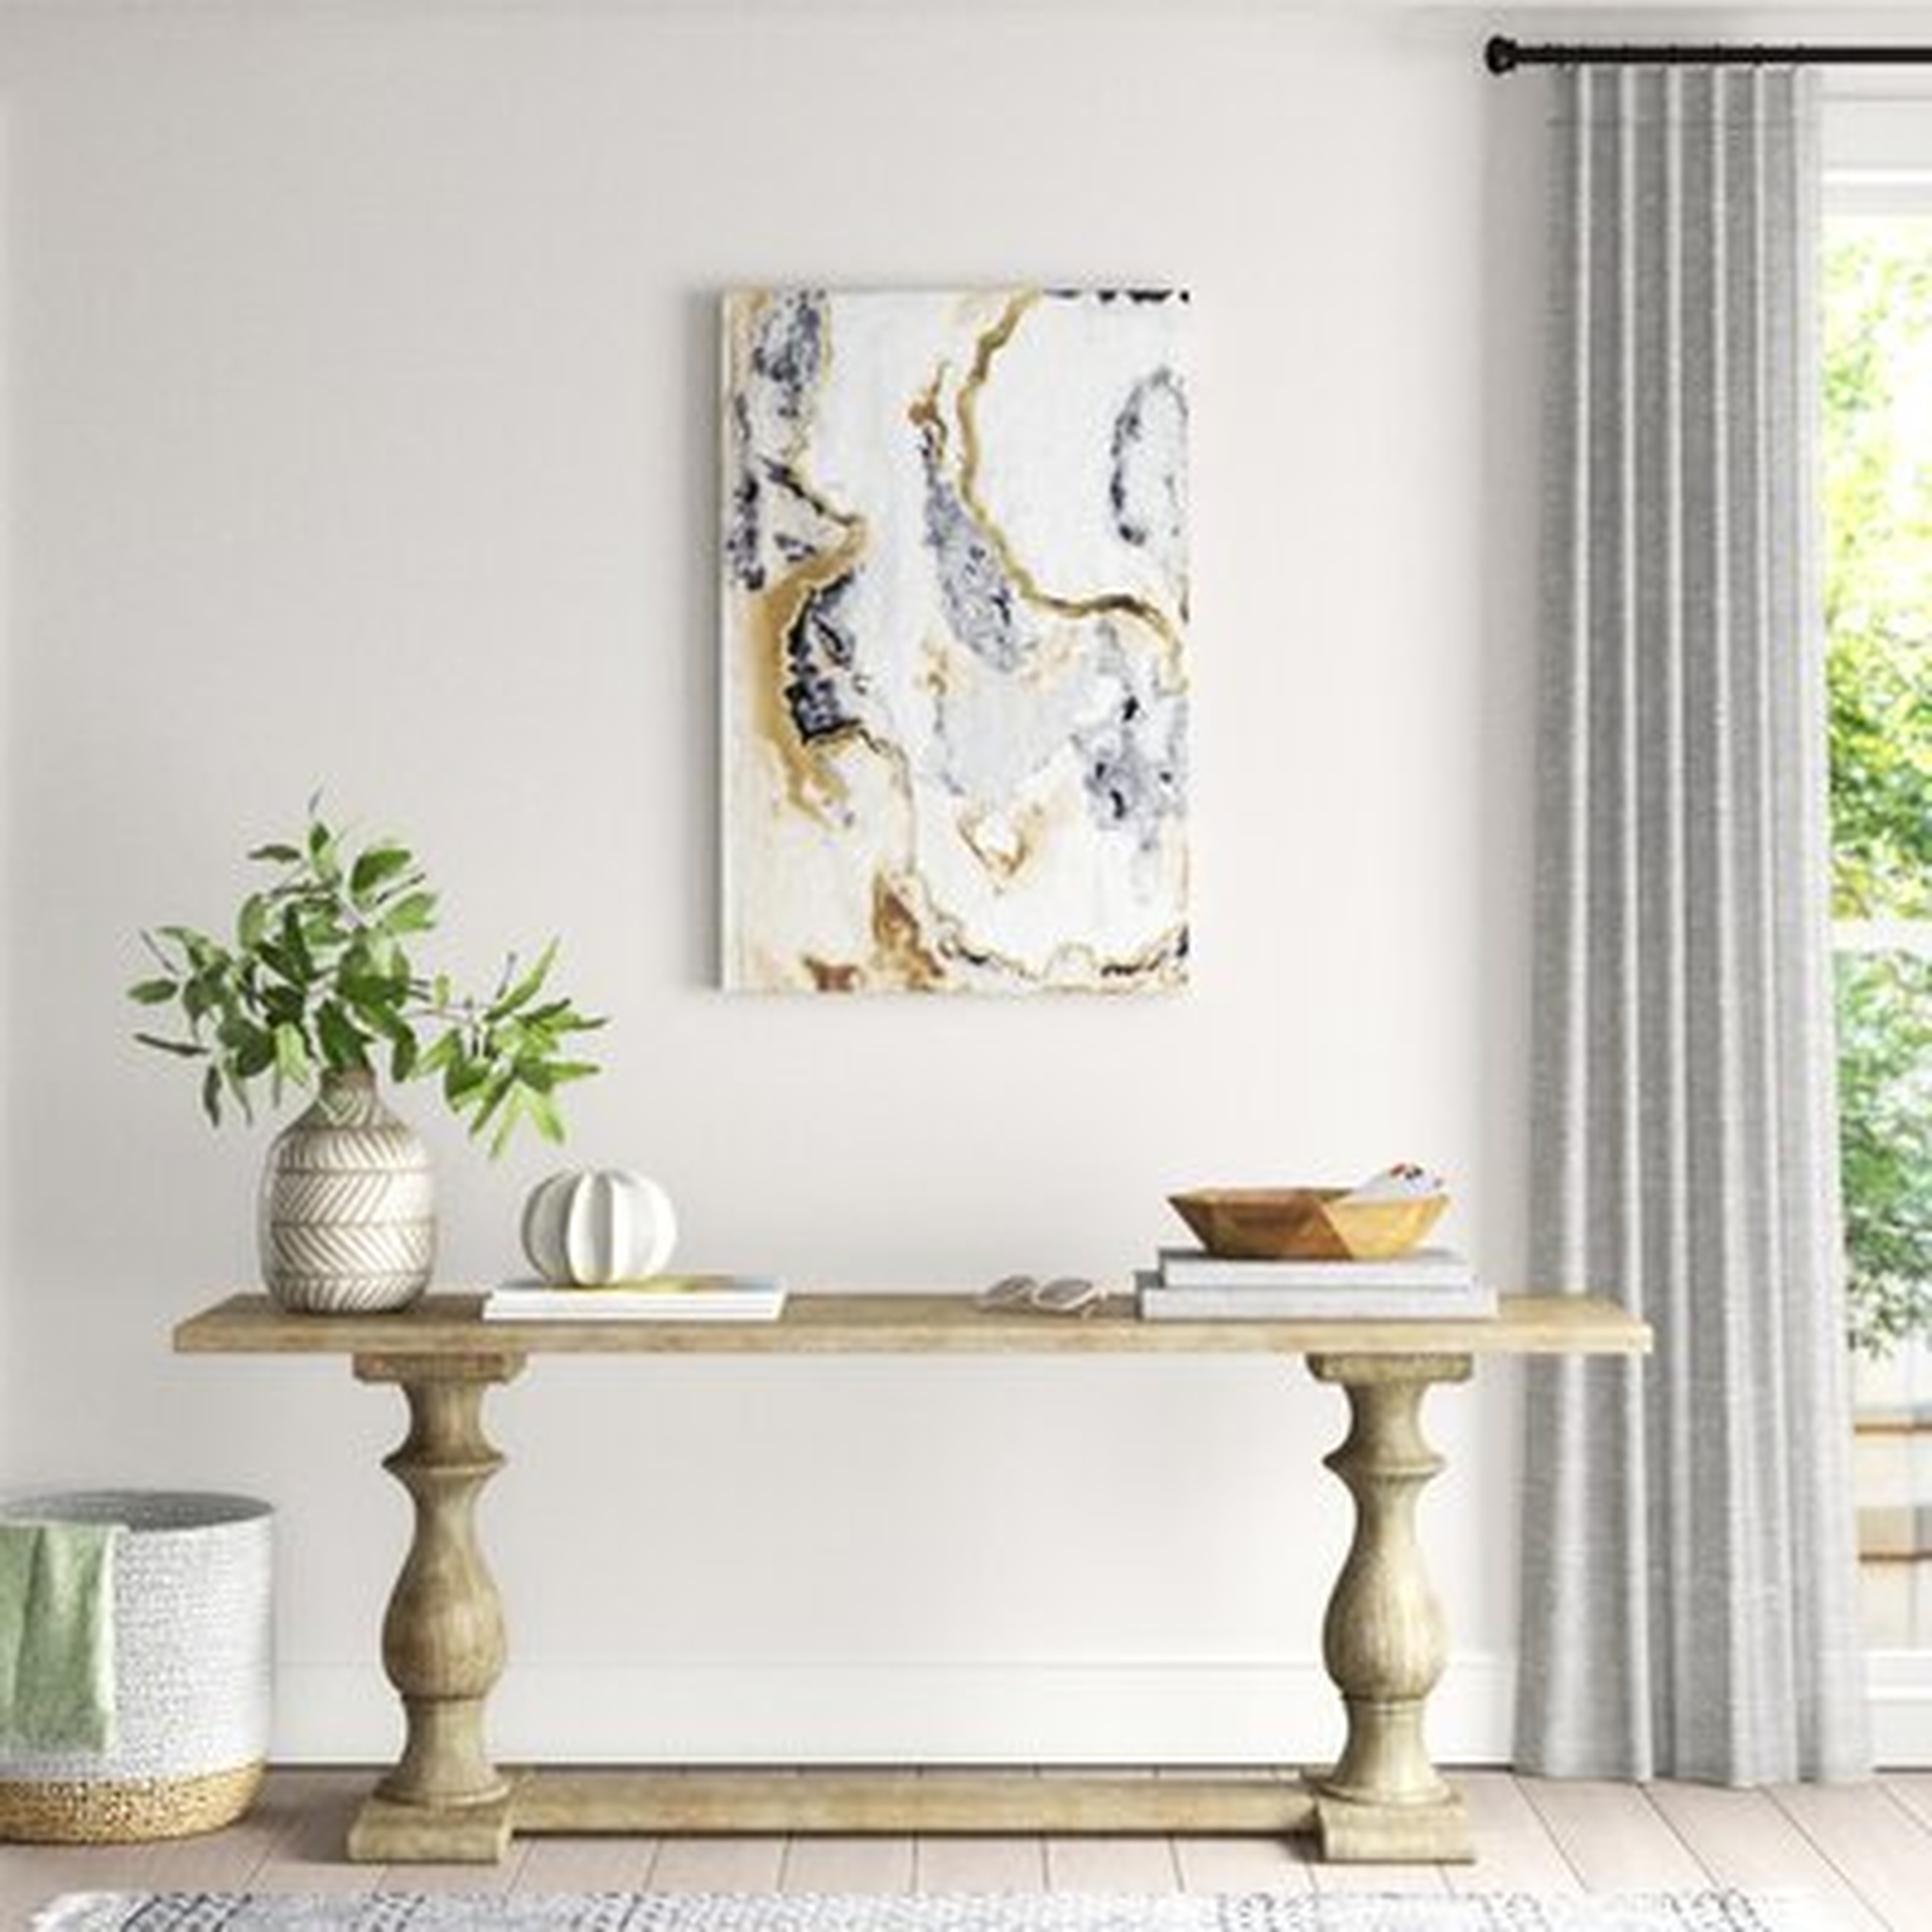 Cinder and Smoke I by Vanna Lam - Wrapped Canvas Painting Print - Wayfair